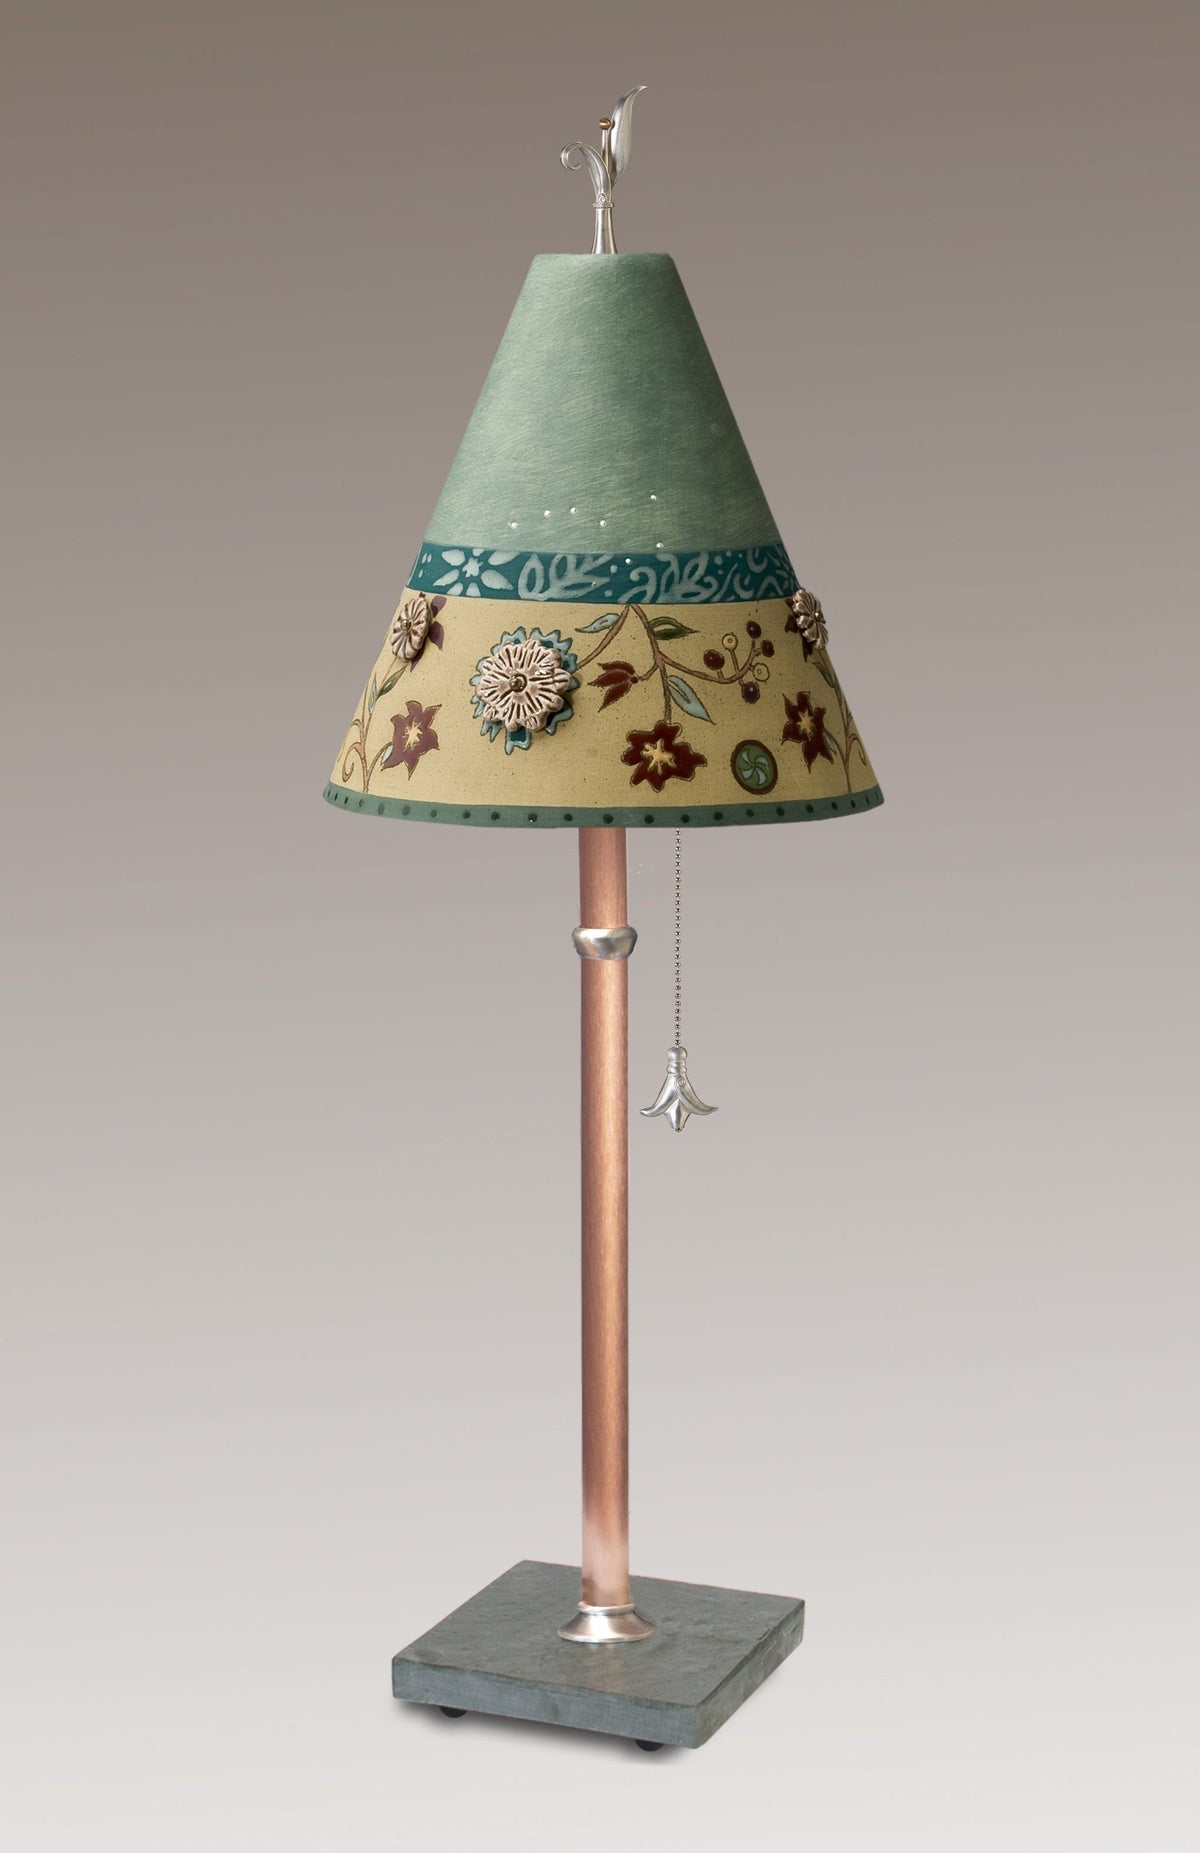 Janna Ugone &amp; Co Table Lamps Copper Table Lamp with Small Conical Ceramic Shade in Eden Sea Glass